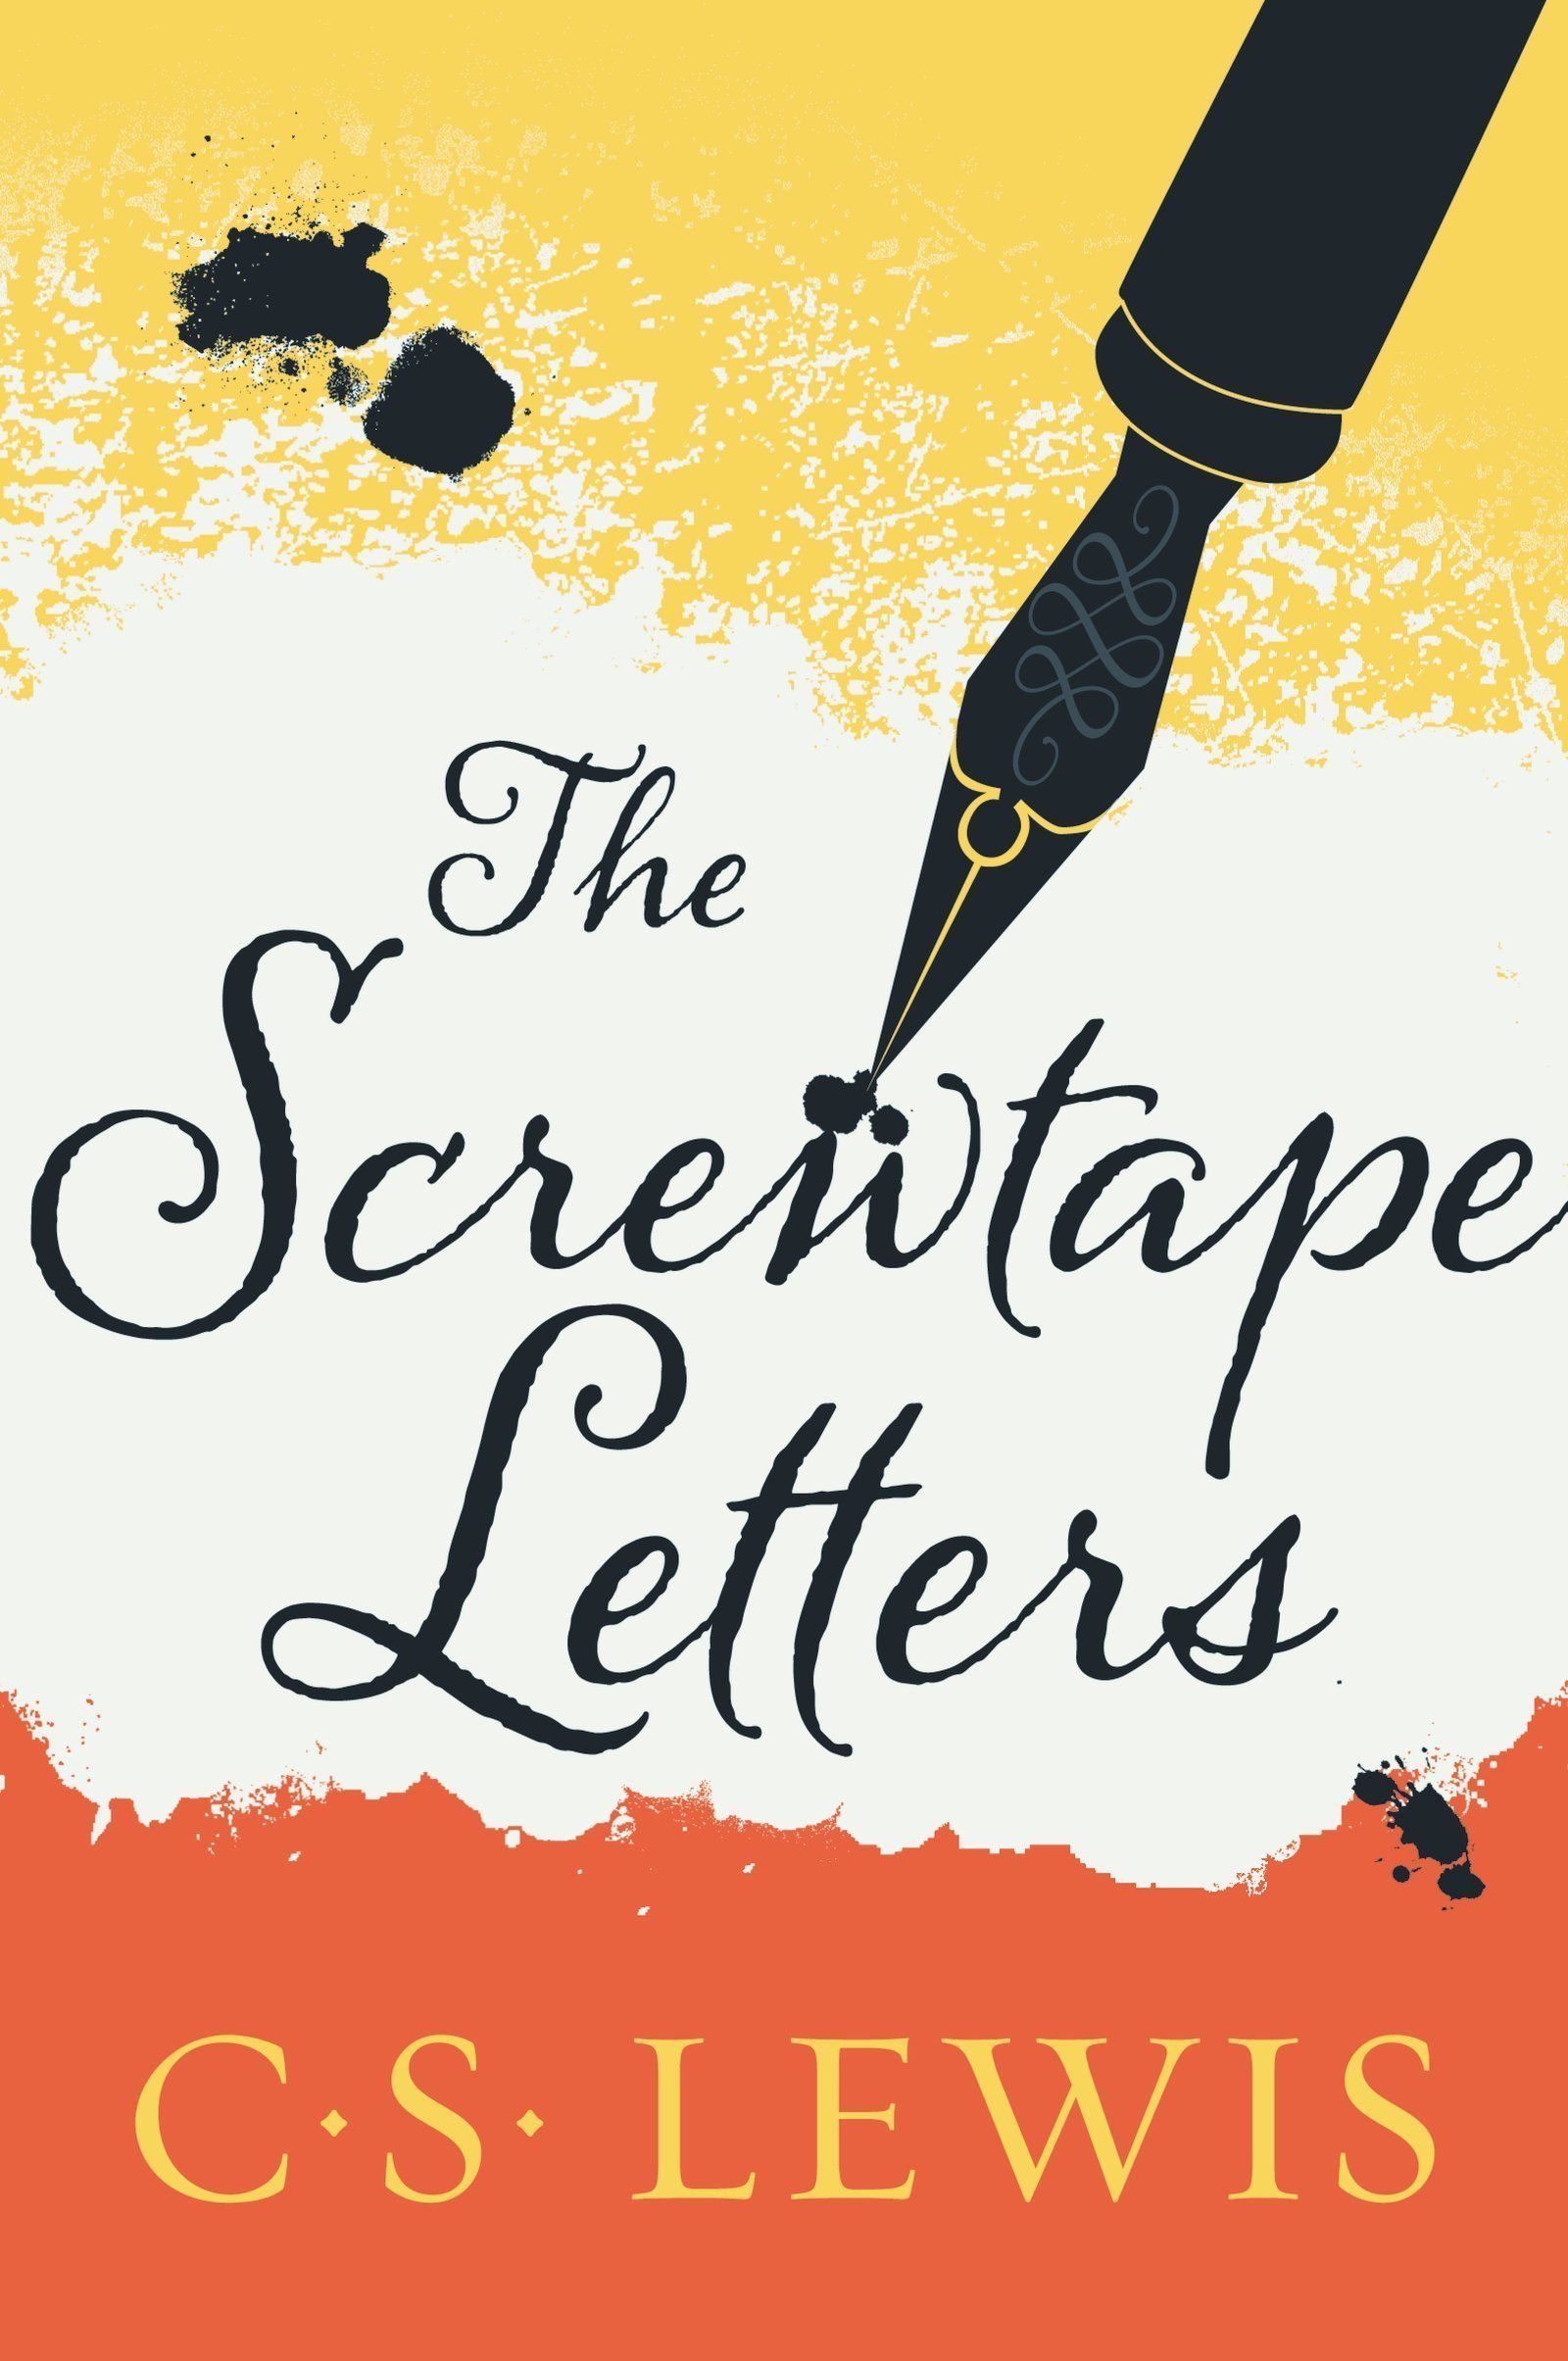 Download The Screwtape Letters PDF by C.S. Lewis